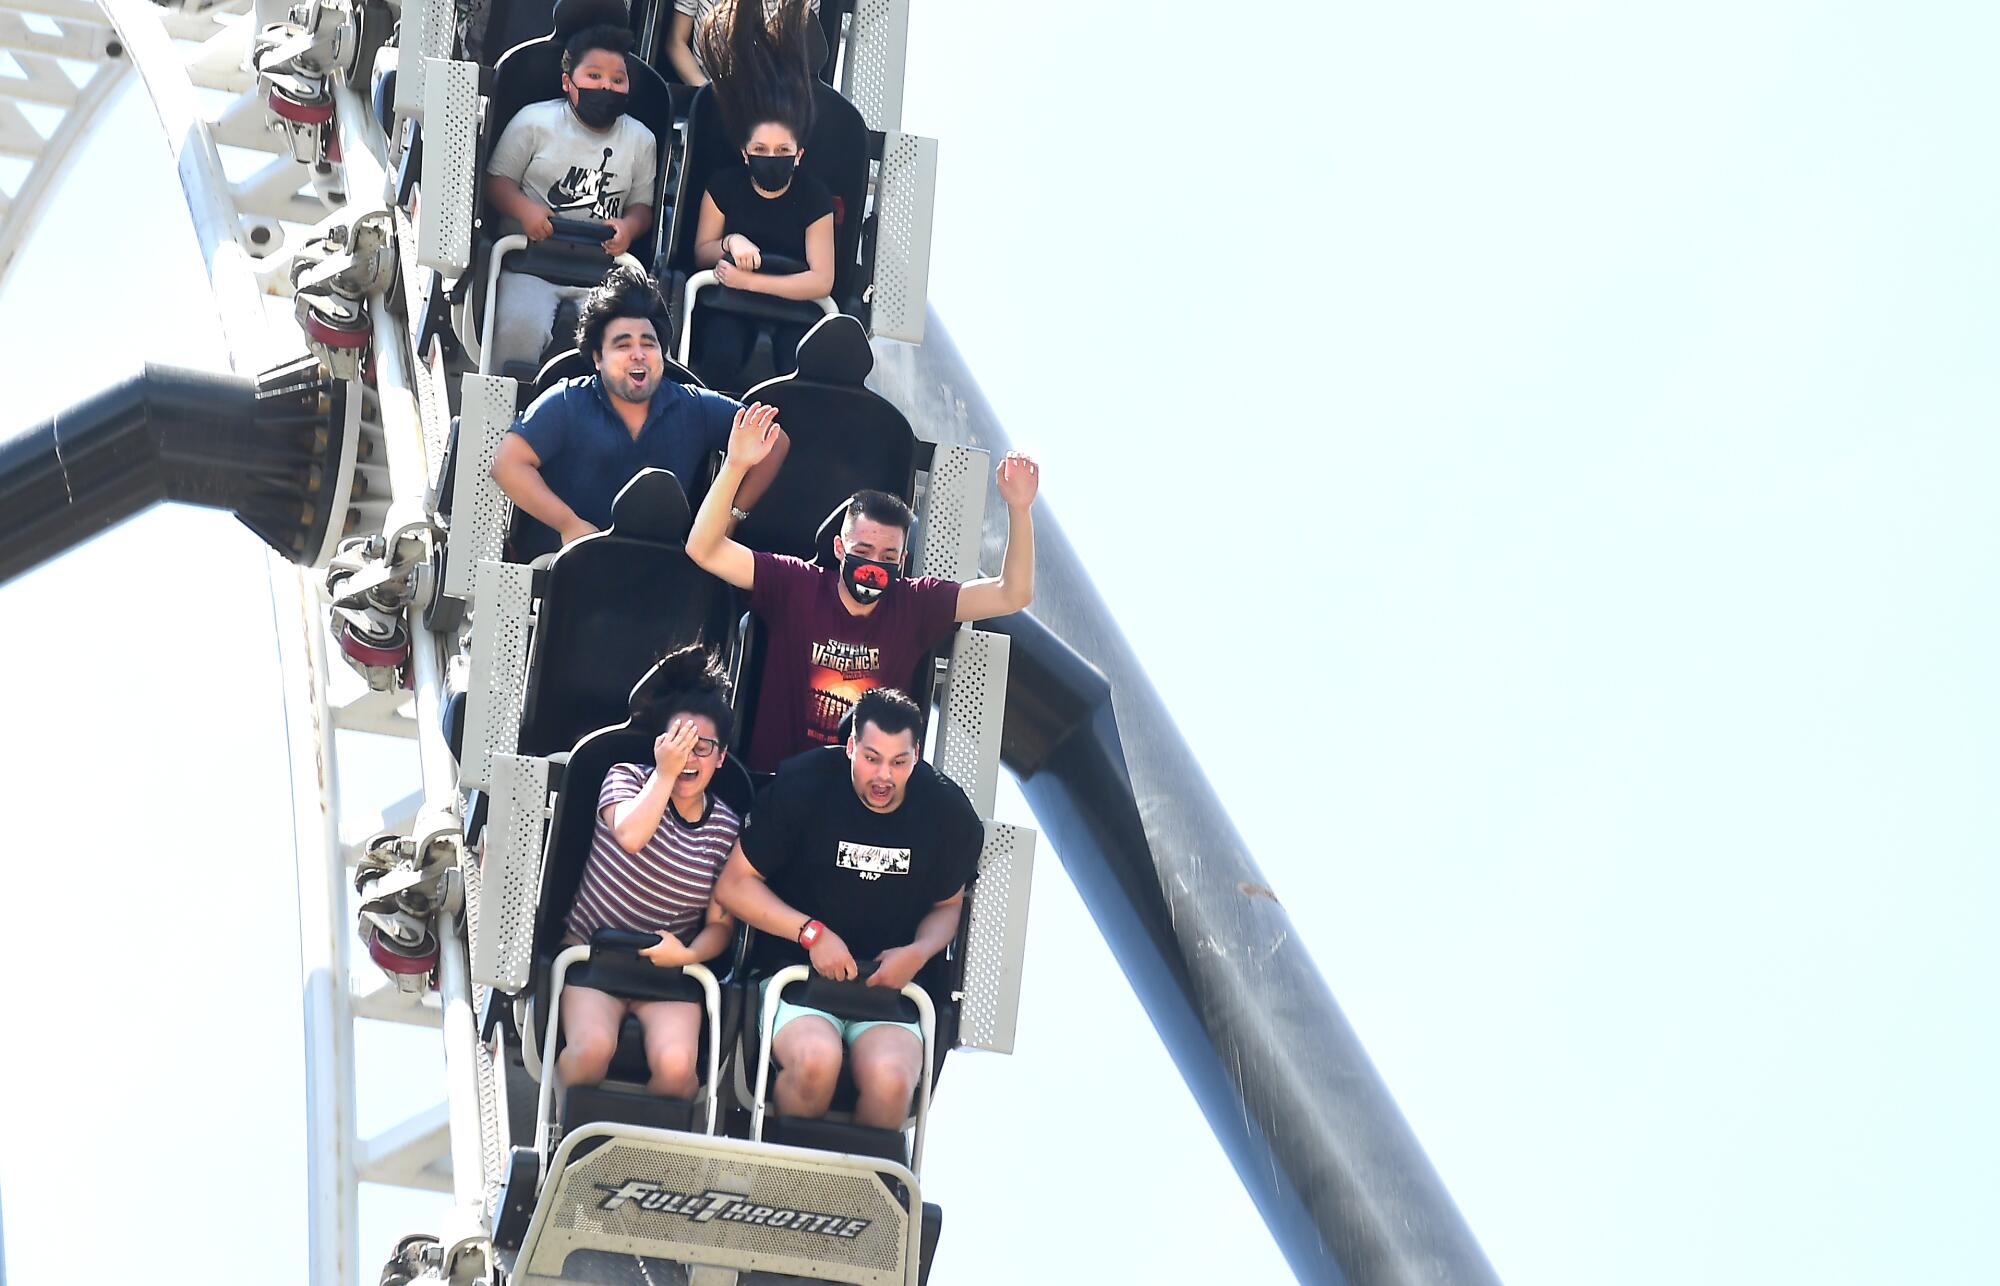 Riders on a roller coaster